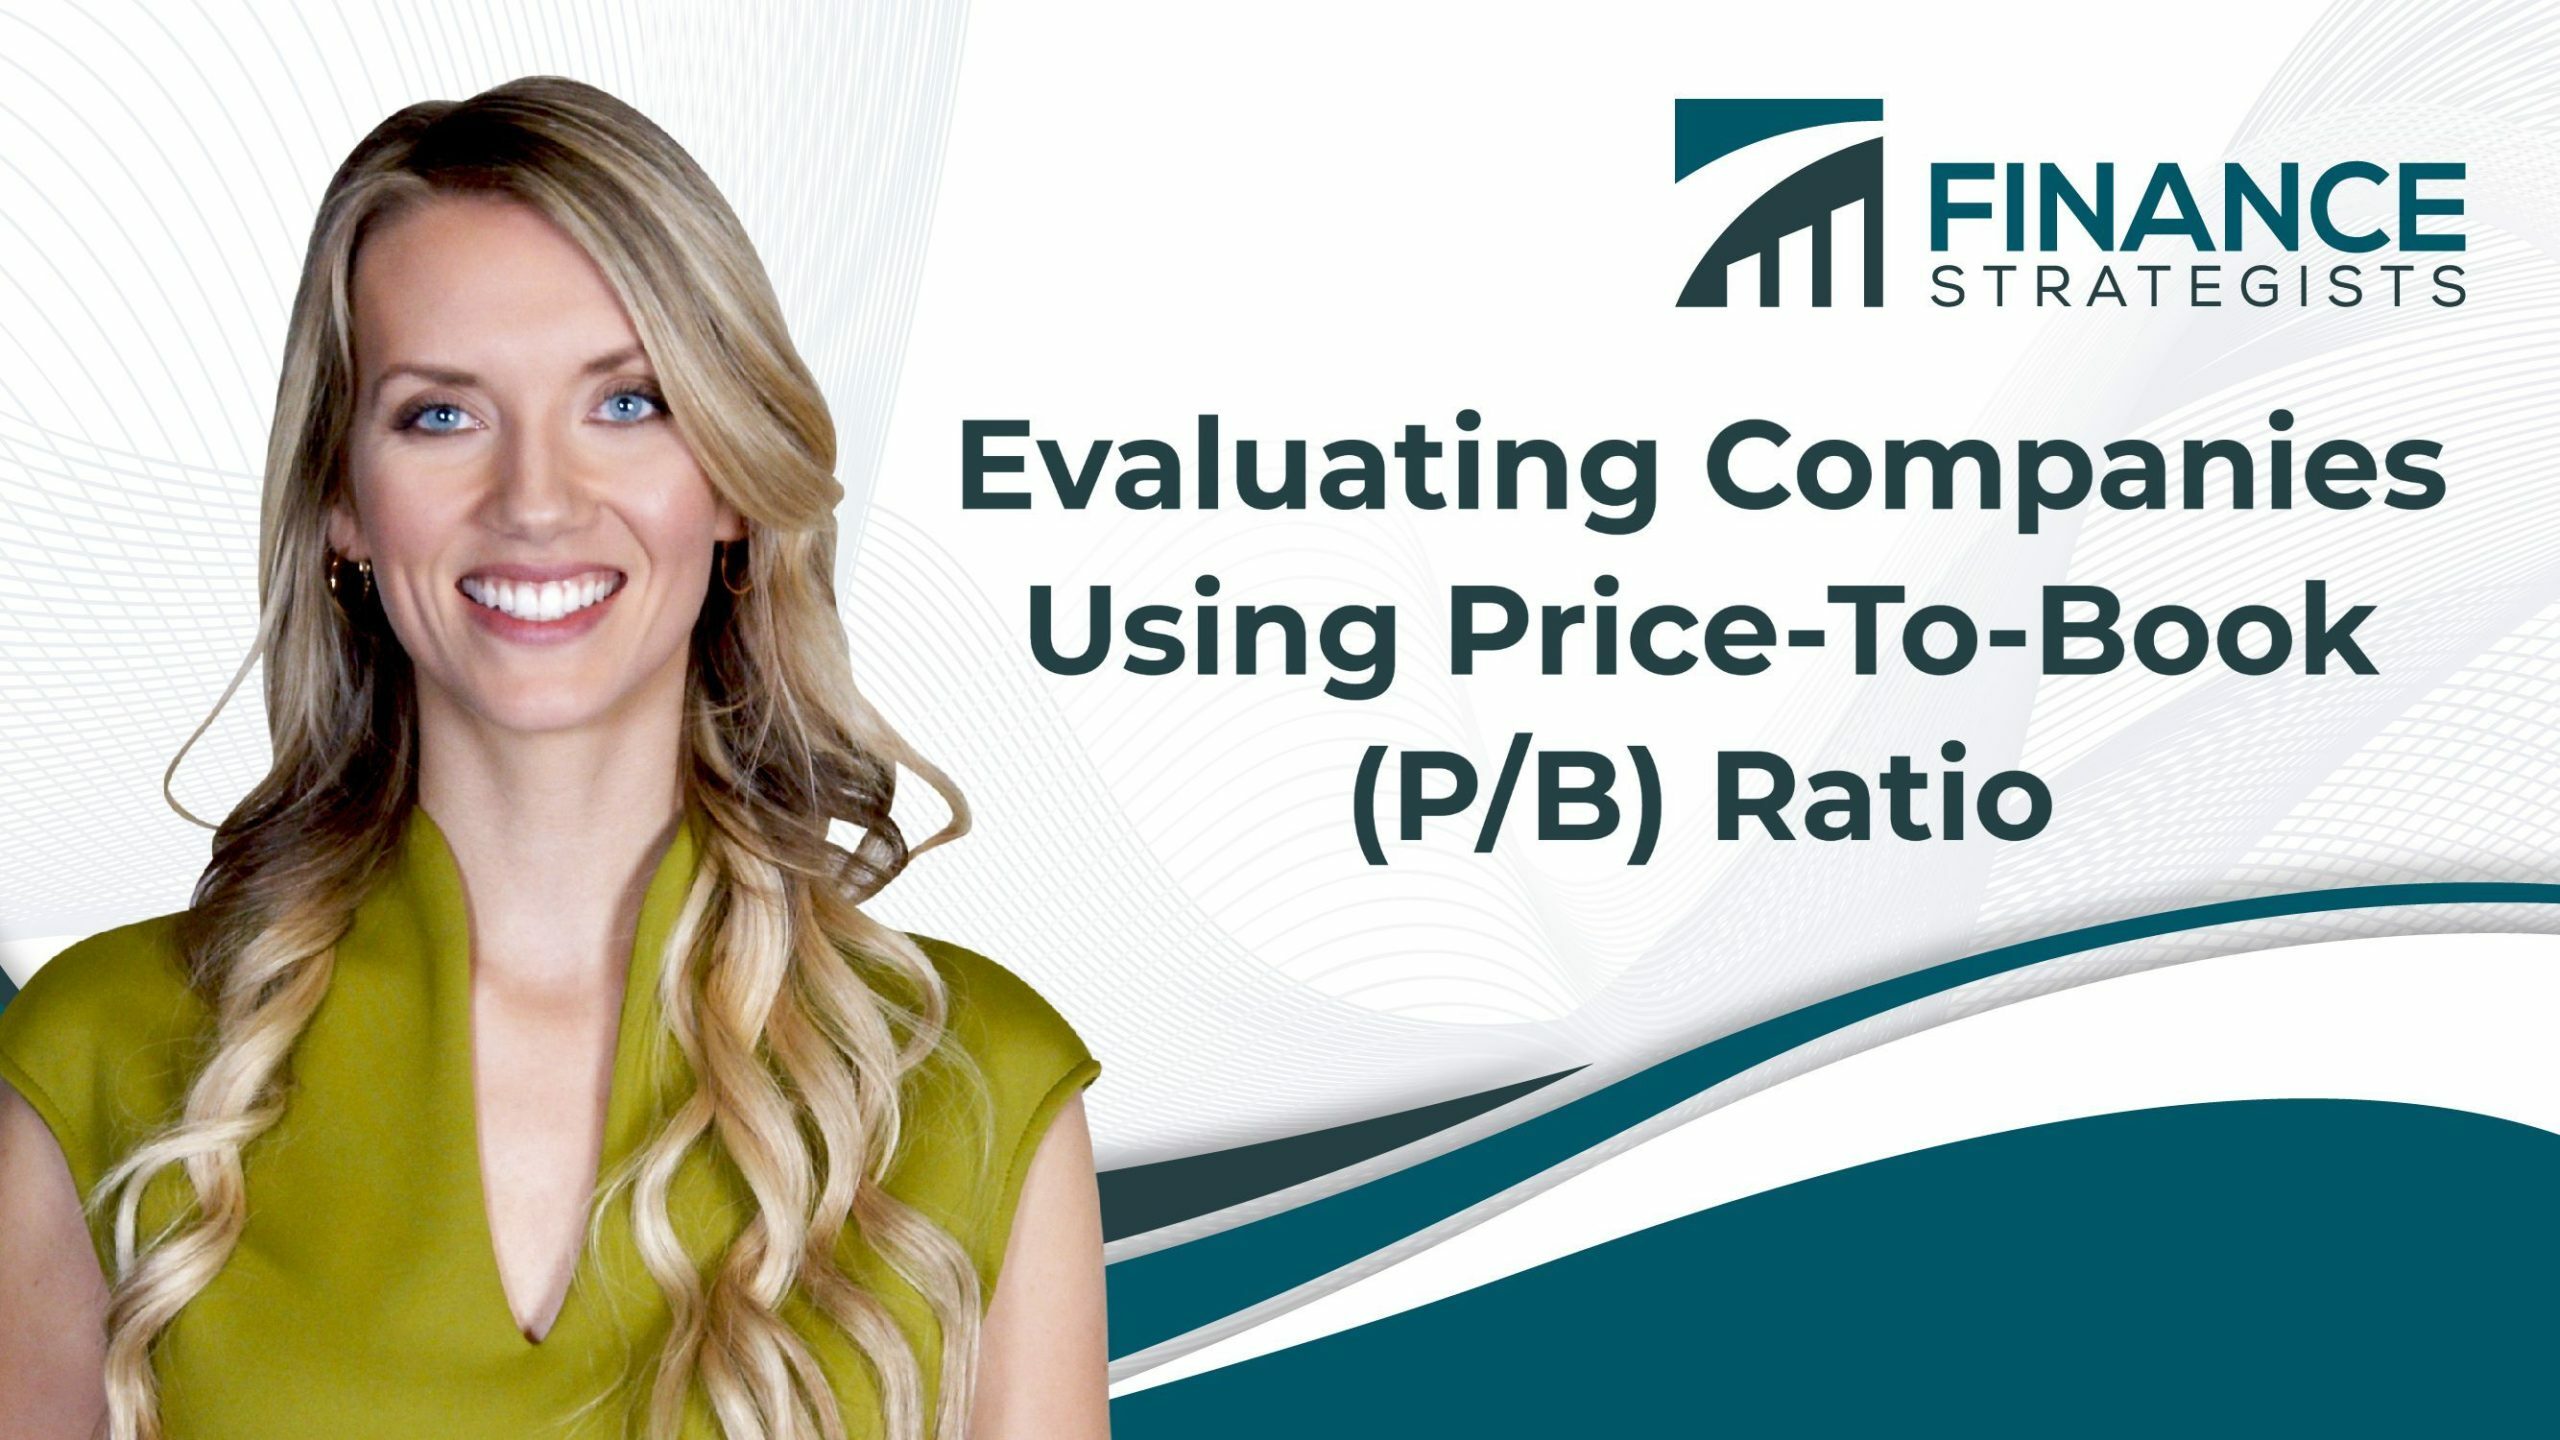 Price-to-Book (PB) Ratio: Meaning, Formula, and Example